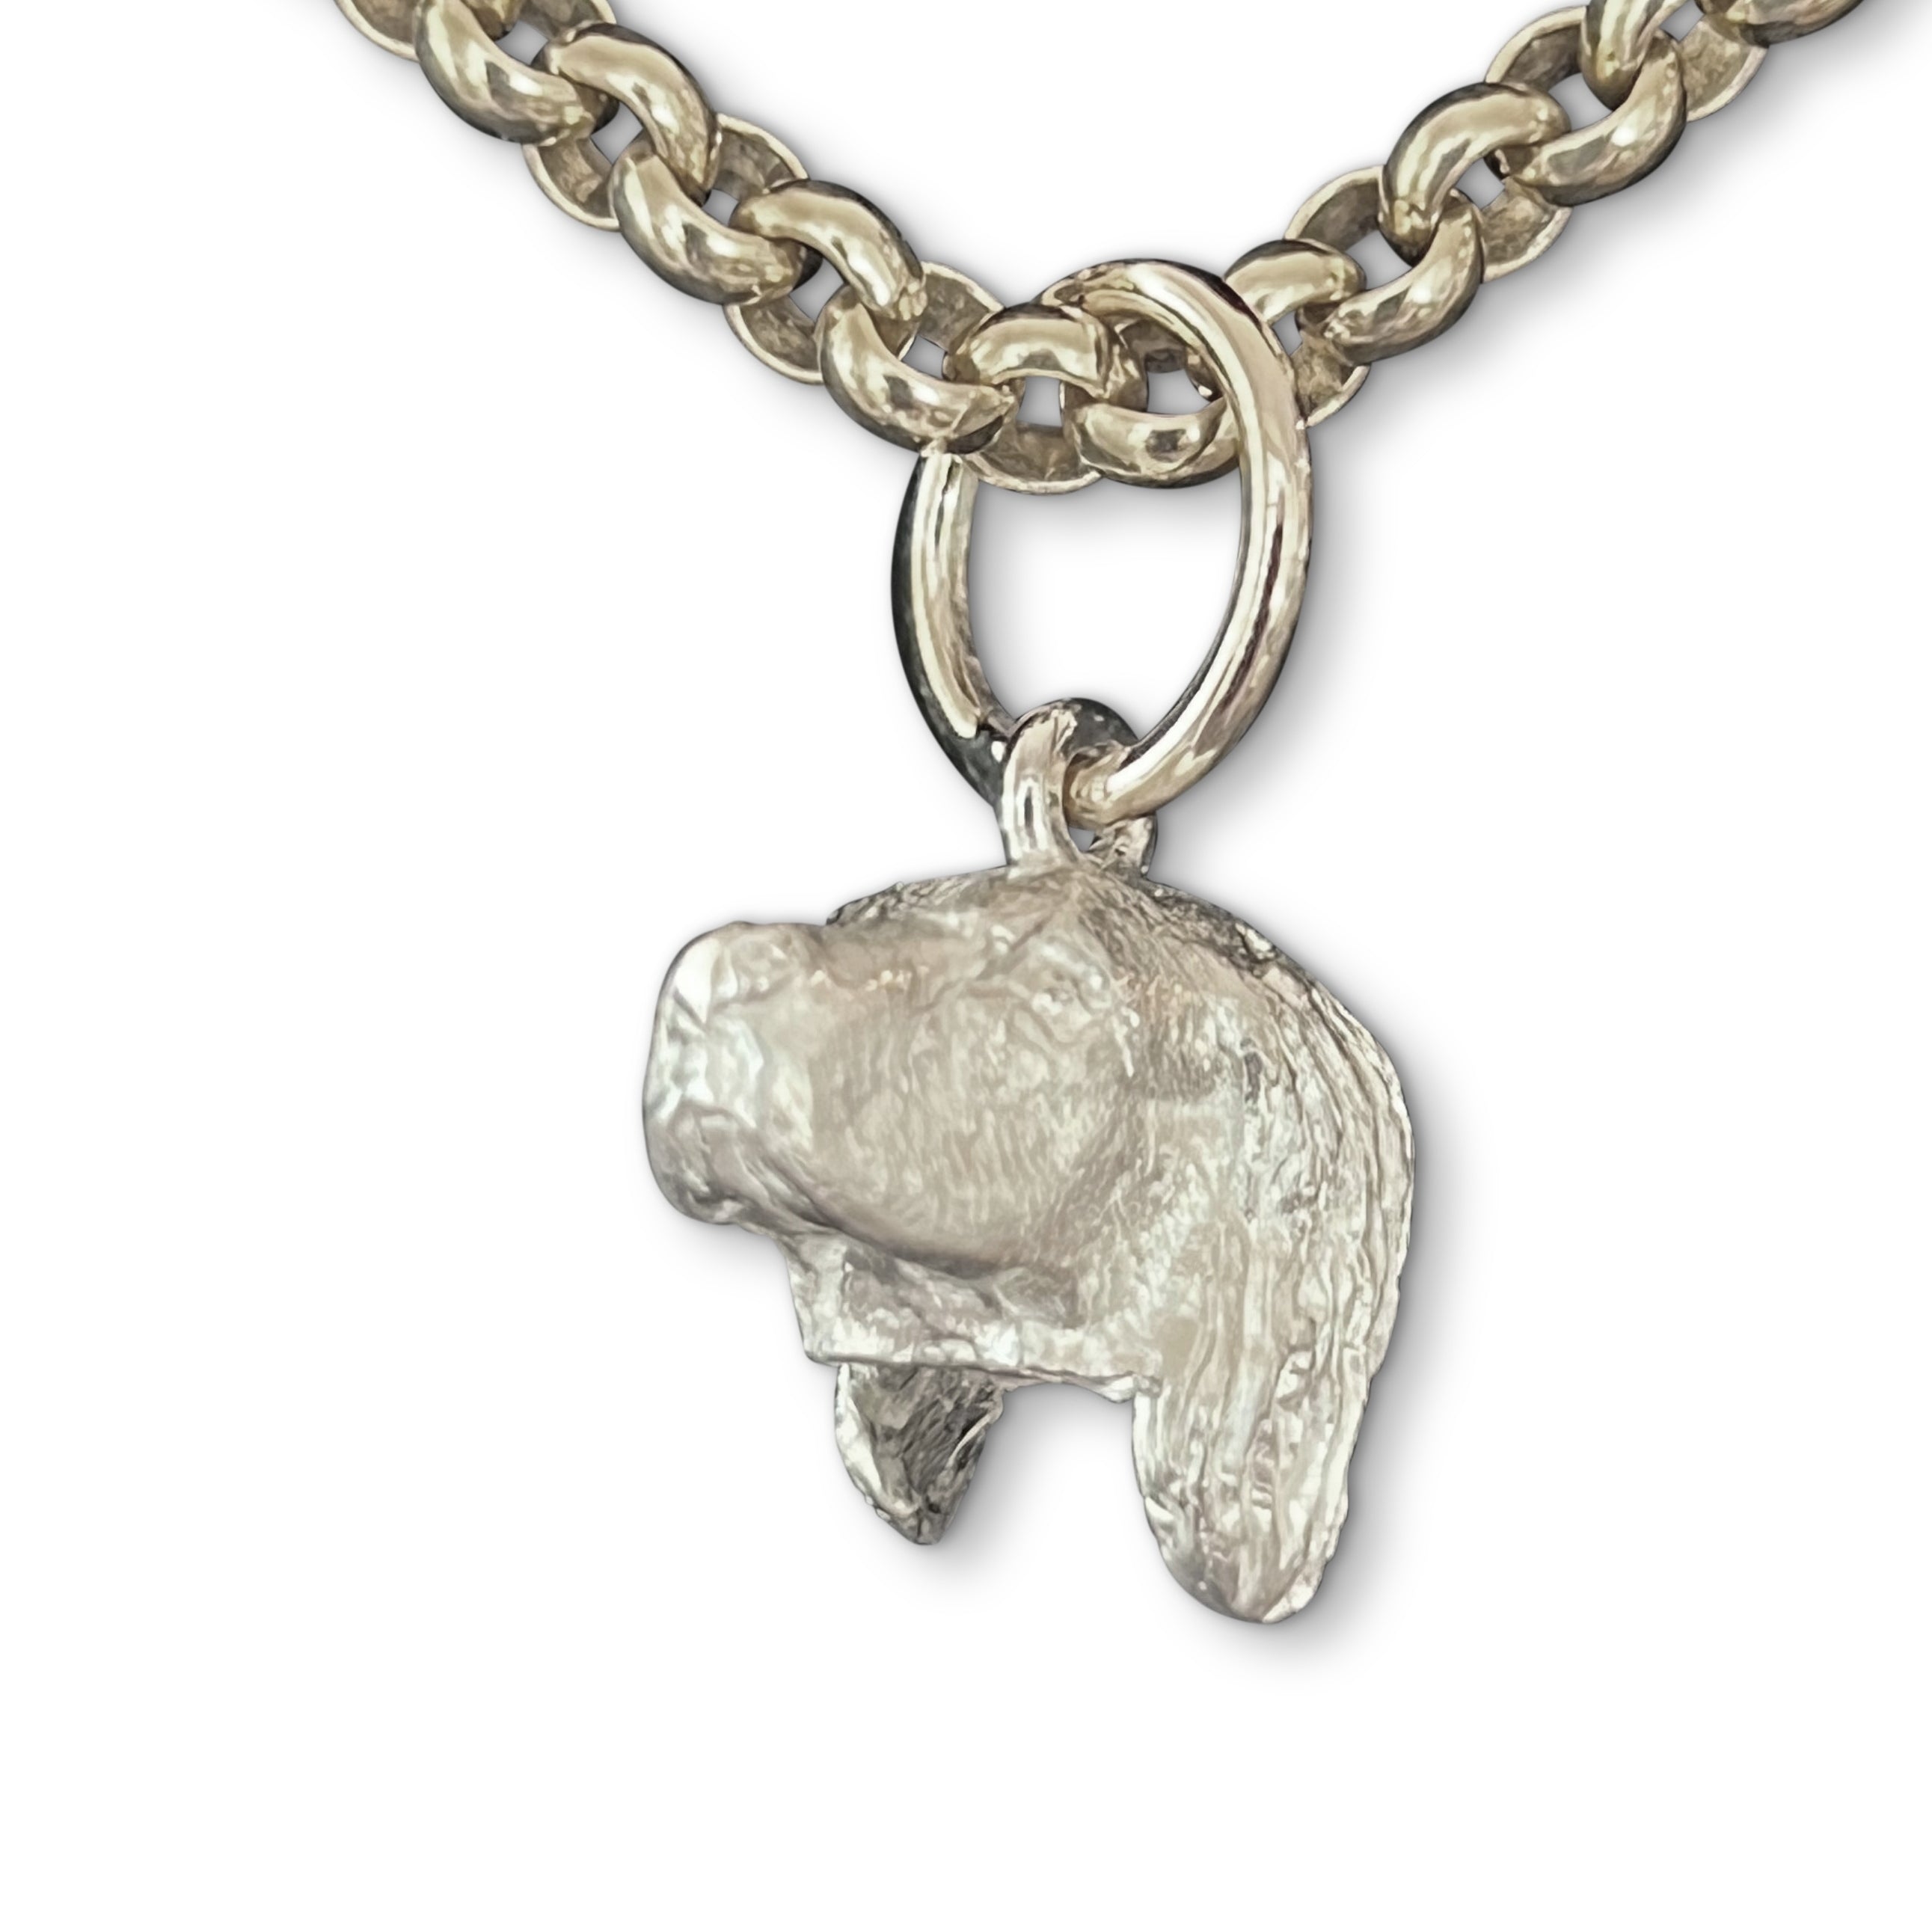 Spaniel Pendant with 9ct Ring by Paul Eaton Sculptor